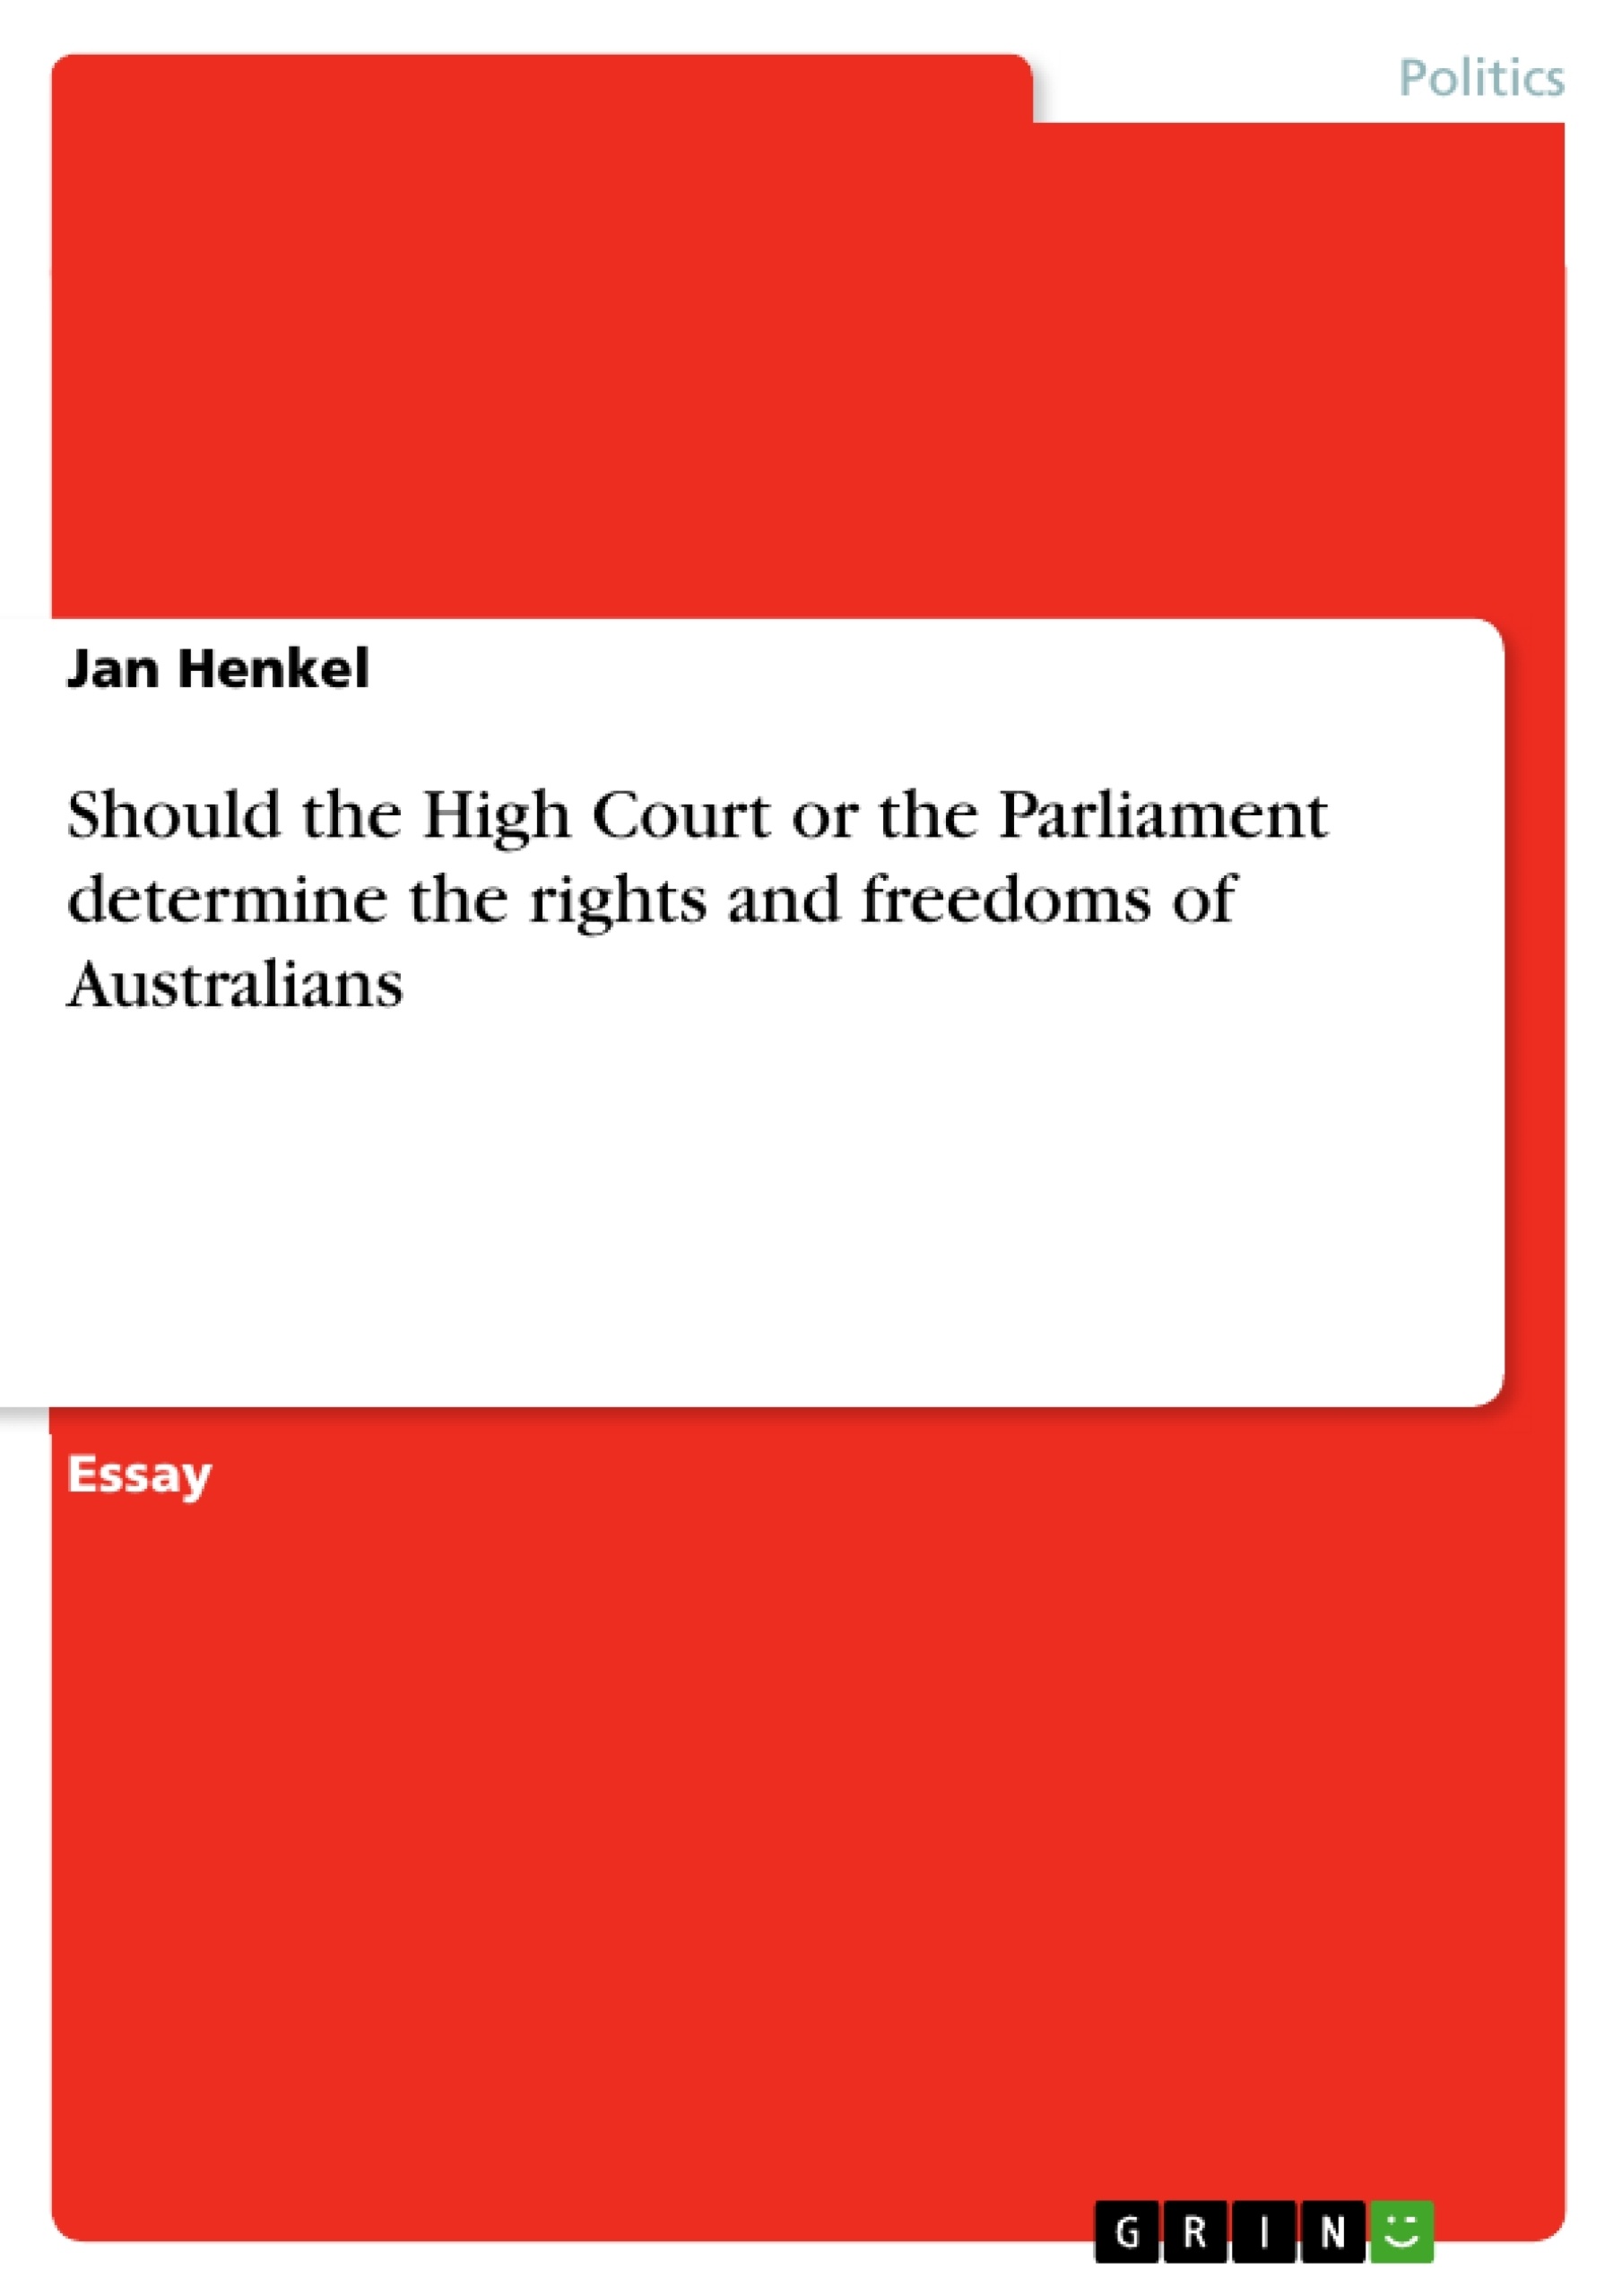 Titre: Should the High Court or the Parliament determine the rights and freedoms of Australians